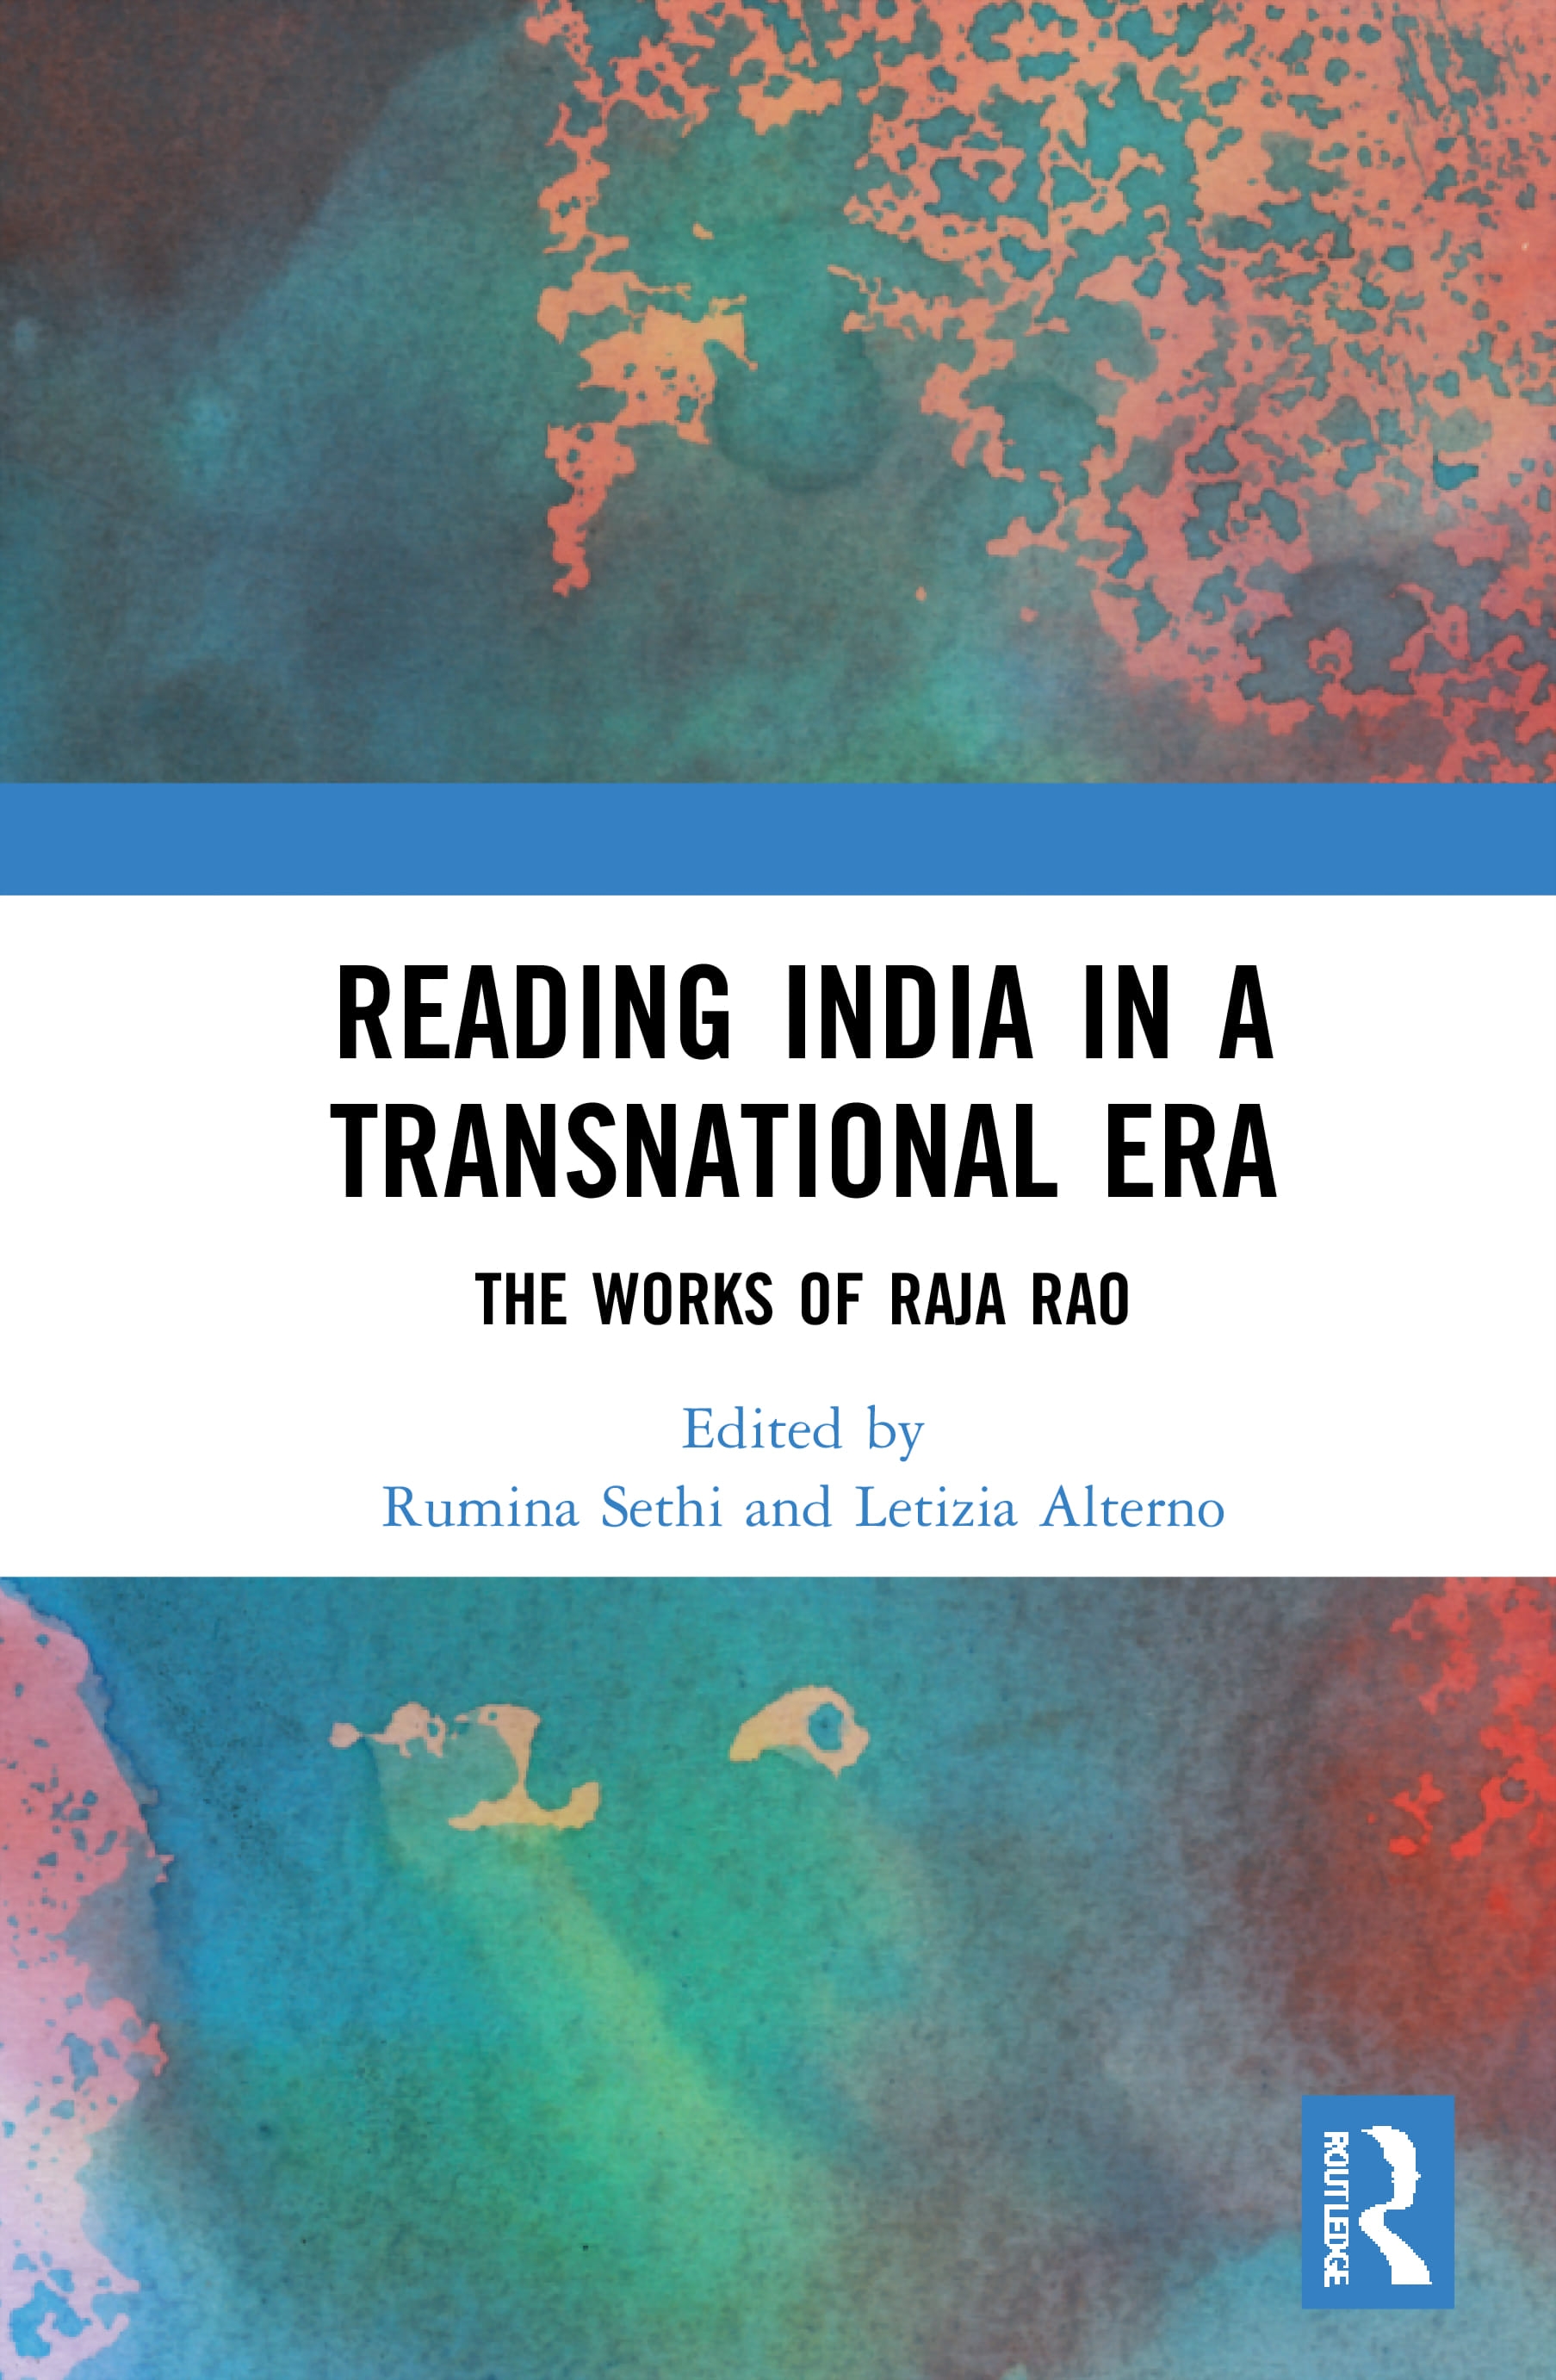 Reading India in a Transnational Era: The Works of Raja Rao